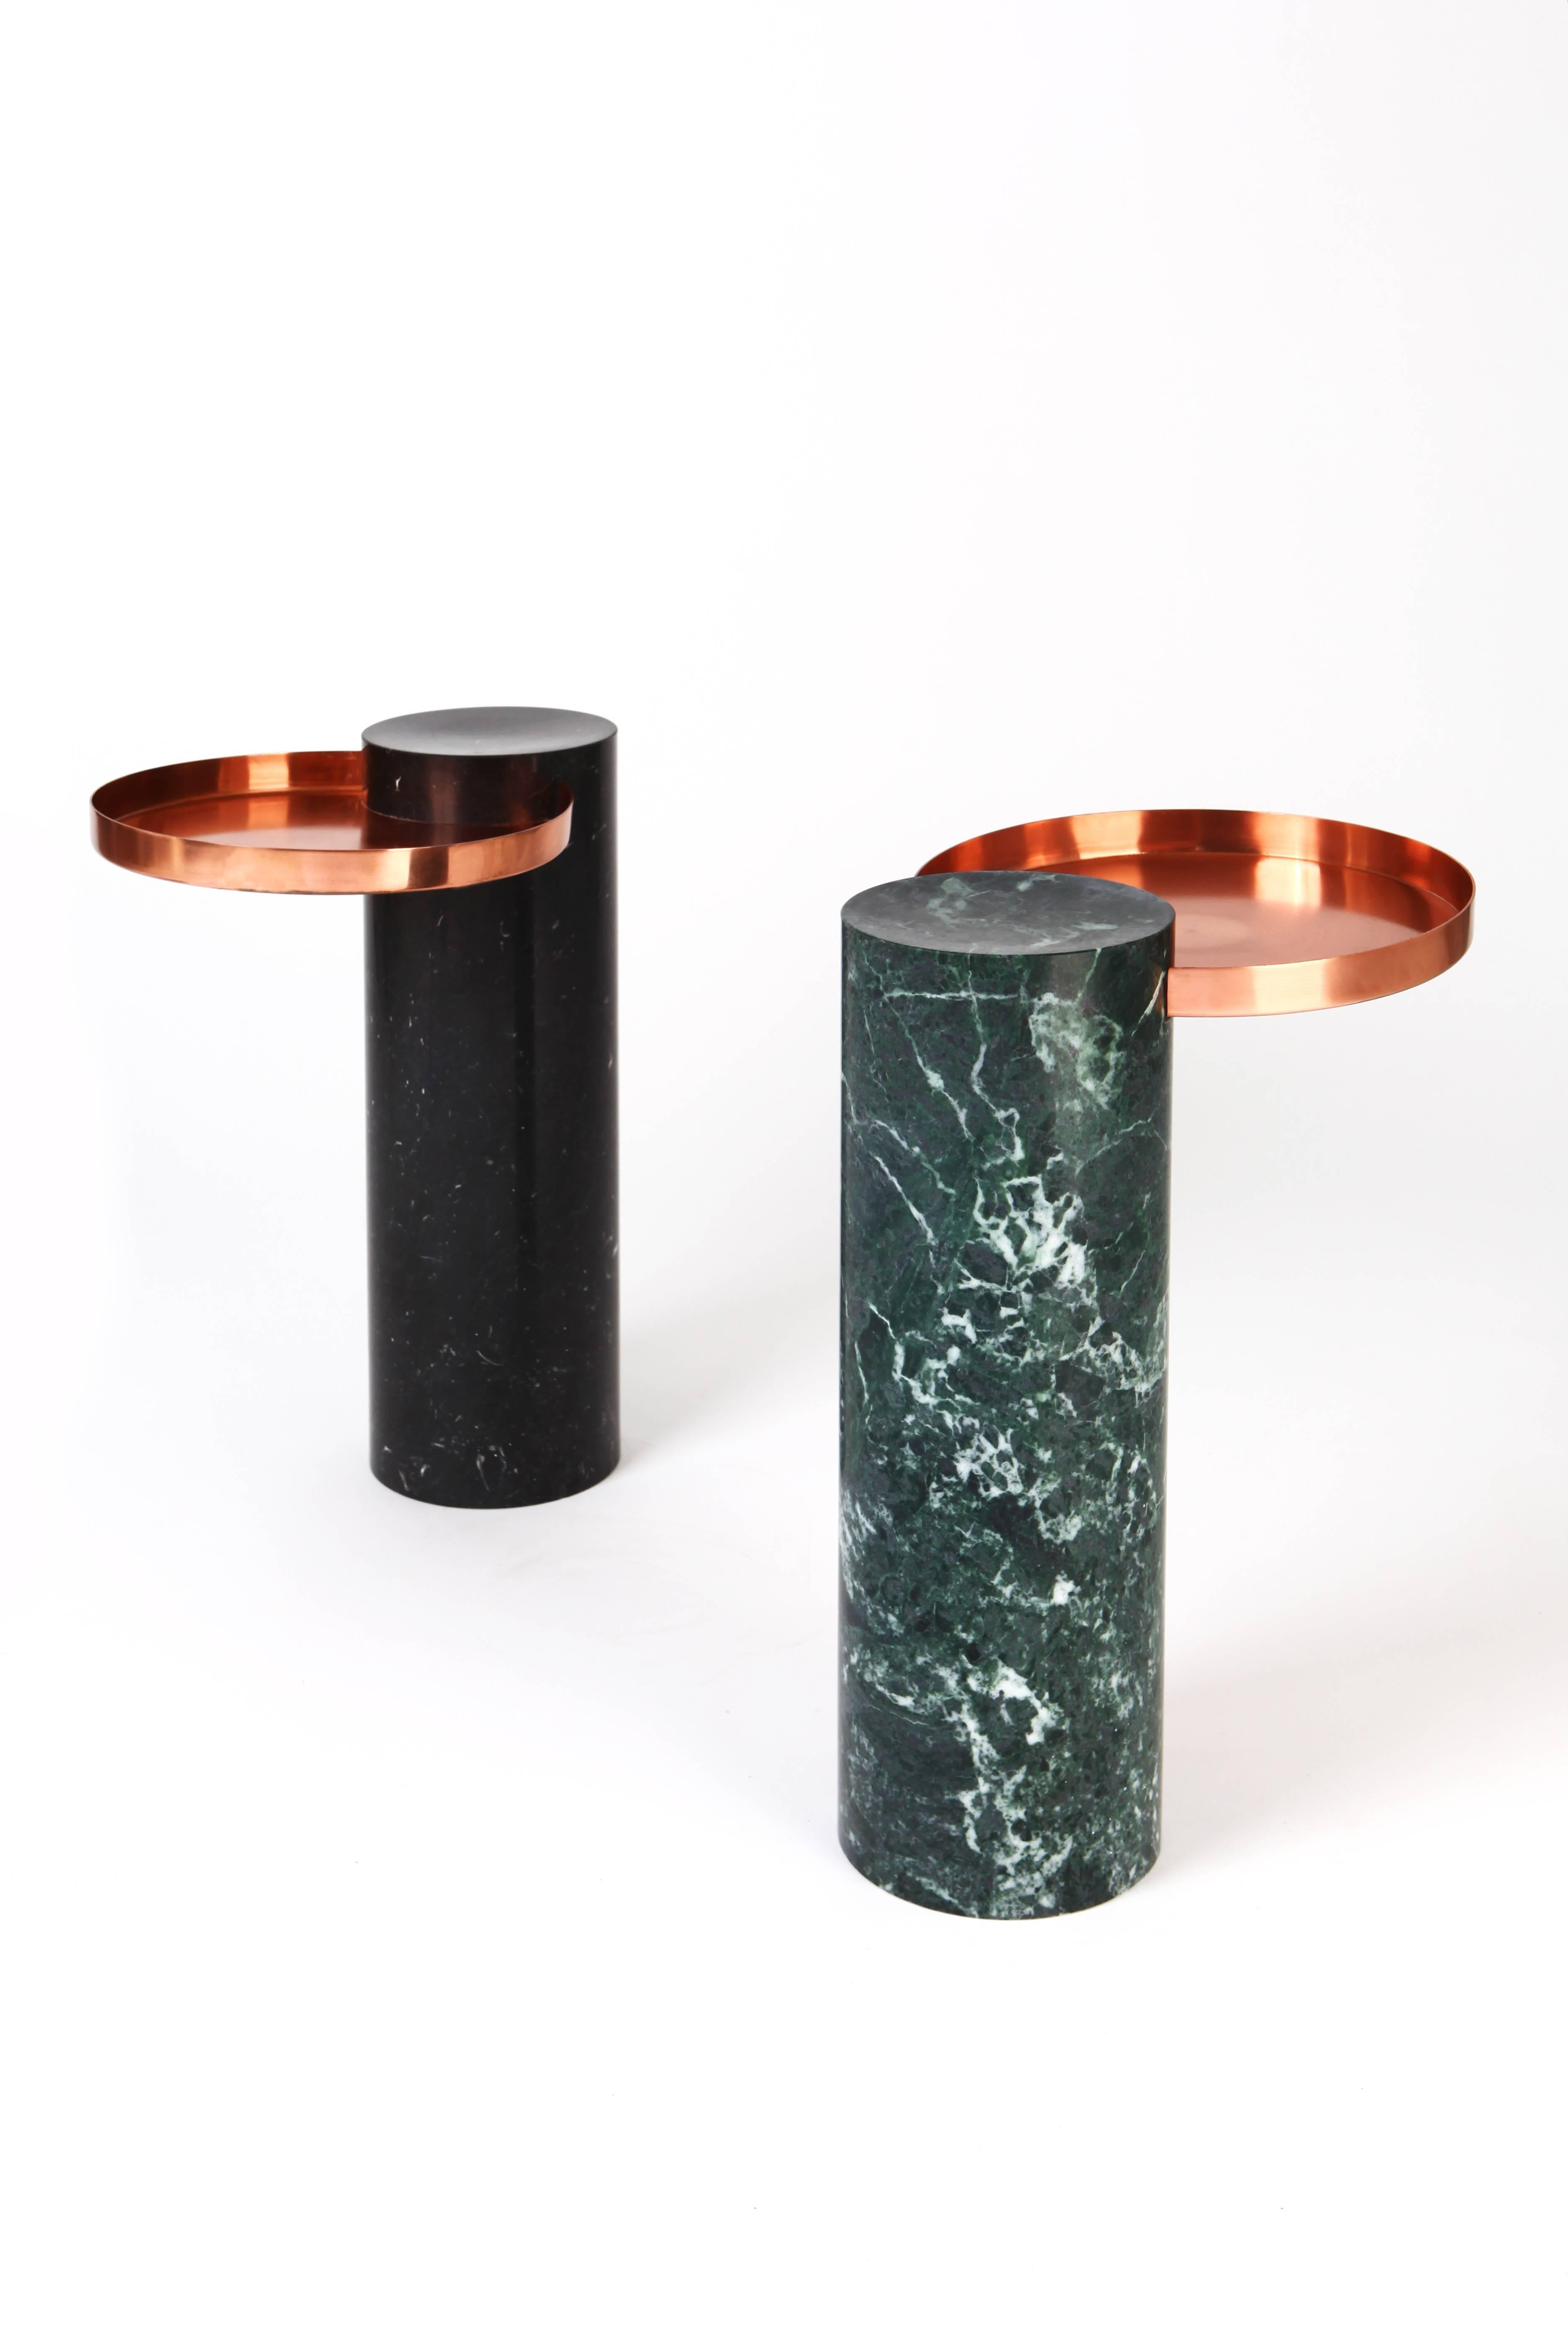 Pair of contemporary gueridons, Sebastian Herkner

The salute table exists in 3 sizes, 3 different marbles for the column and 4 different finishes for the tray for a virtually endless number of configurations. In addition, Salute can be made